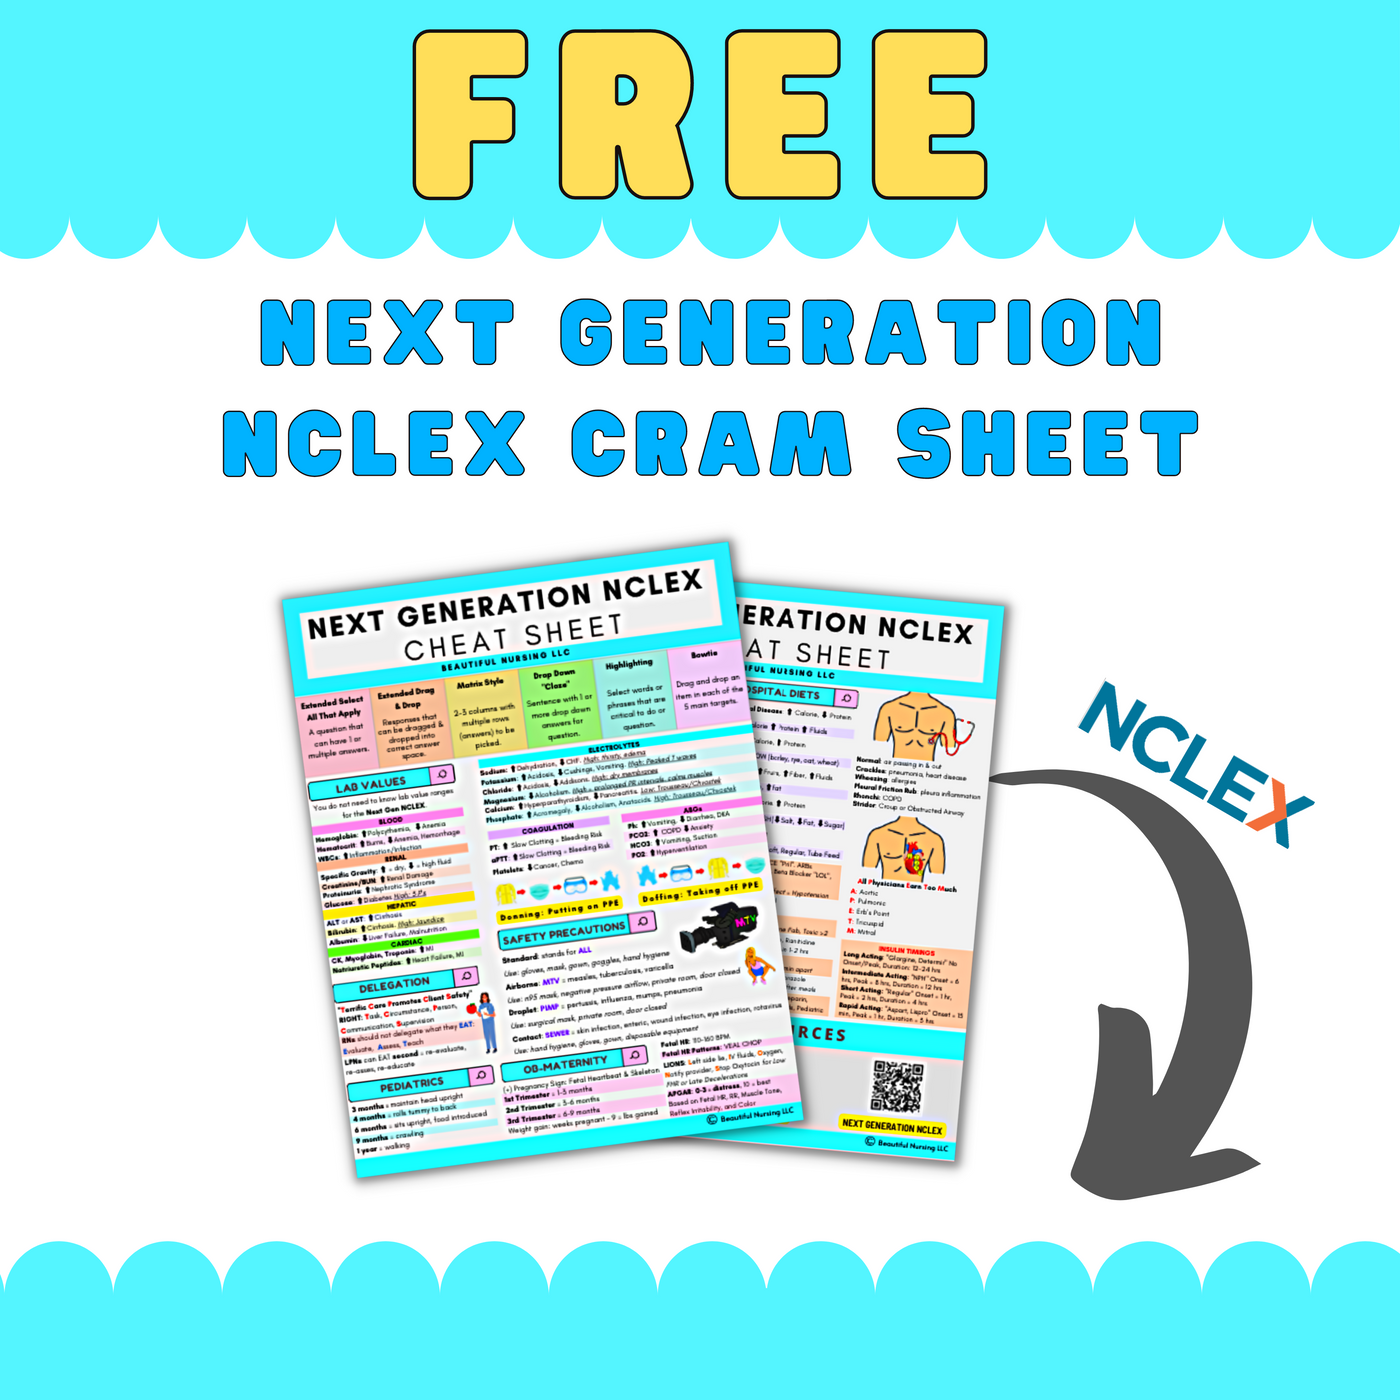 Quick Facts for NCLEX: #1 Next-Generation Study Guide